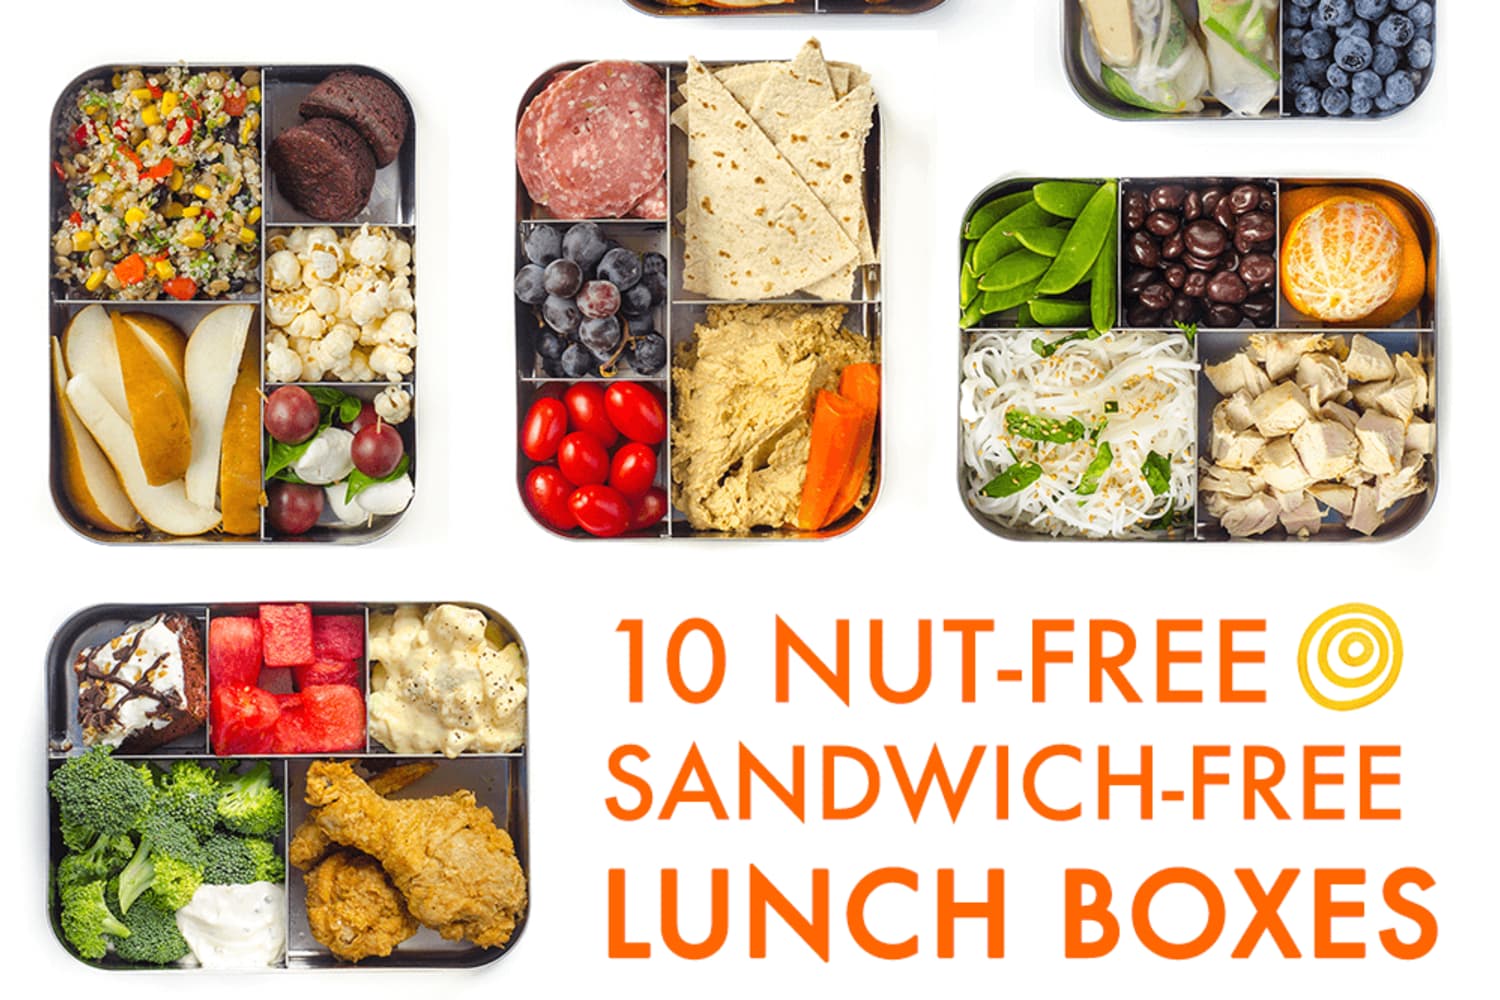 15 Easy Lunch Ideas for 1 Year Olds (For Home or to Pack!)